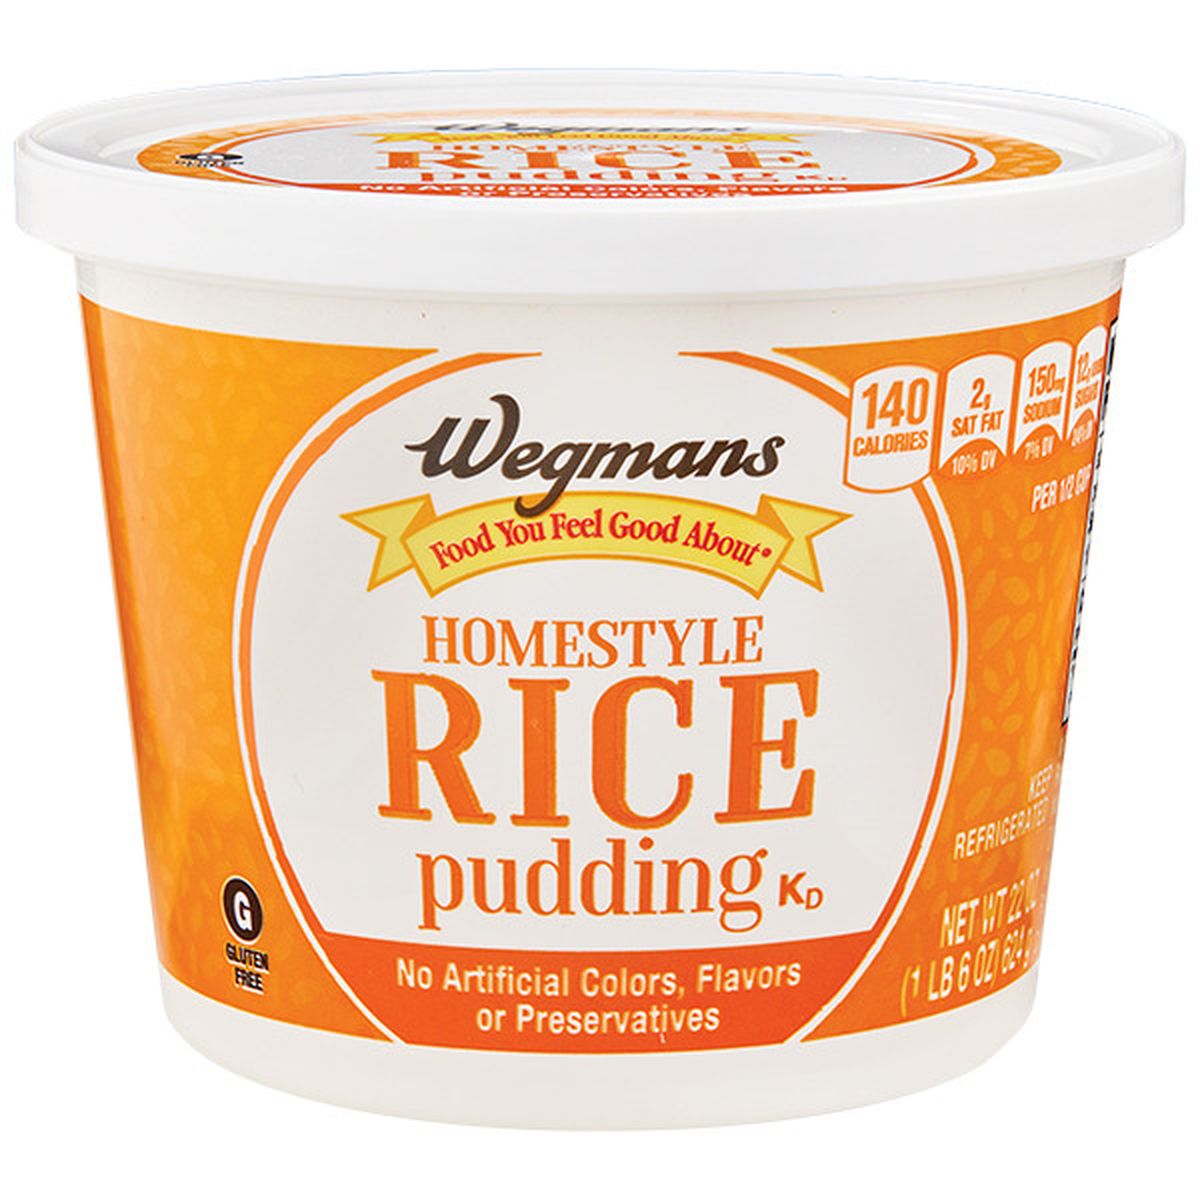 Calories in Wegmans Homestyle Rice Pudding